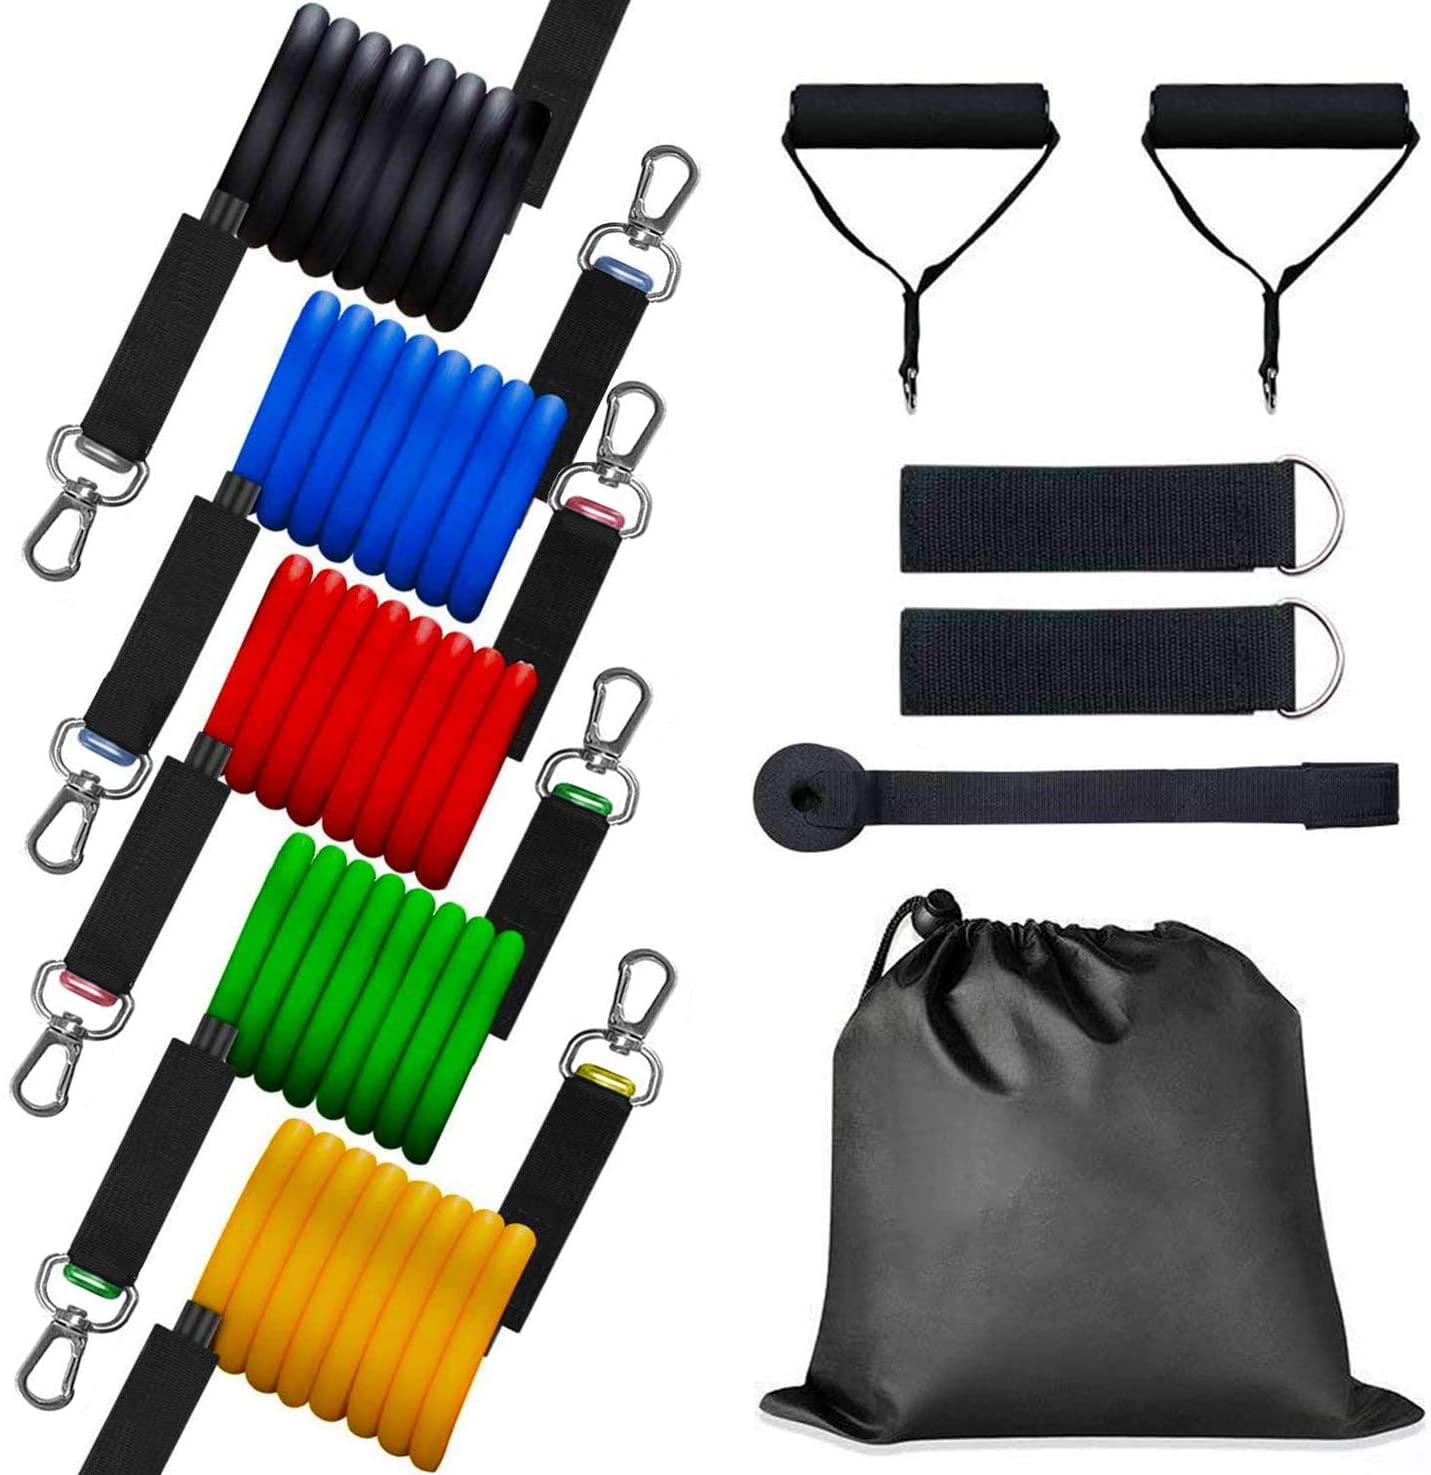 1pc Black Advanced Door Anchor Strap for Home Fitness Resistance Exercise Bands